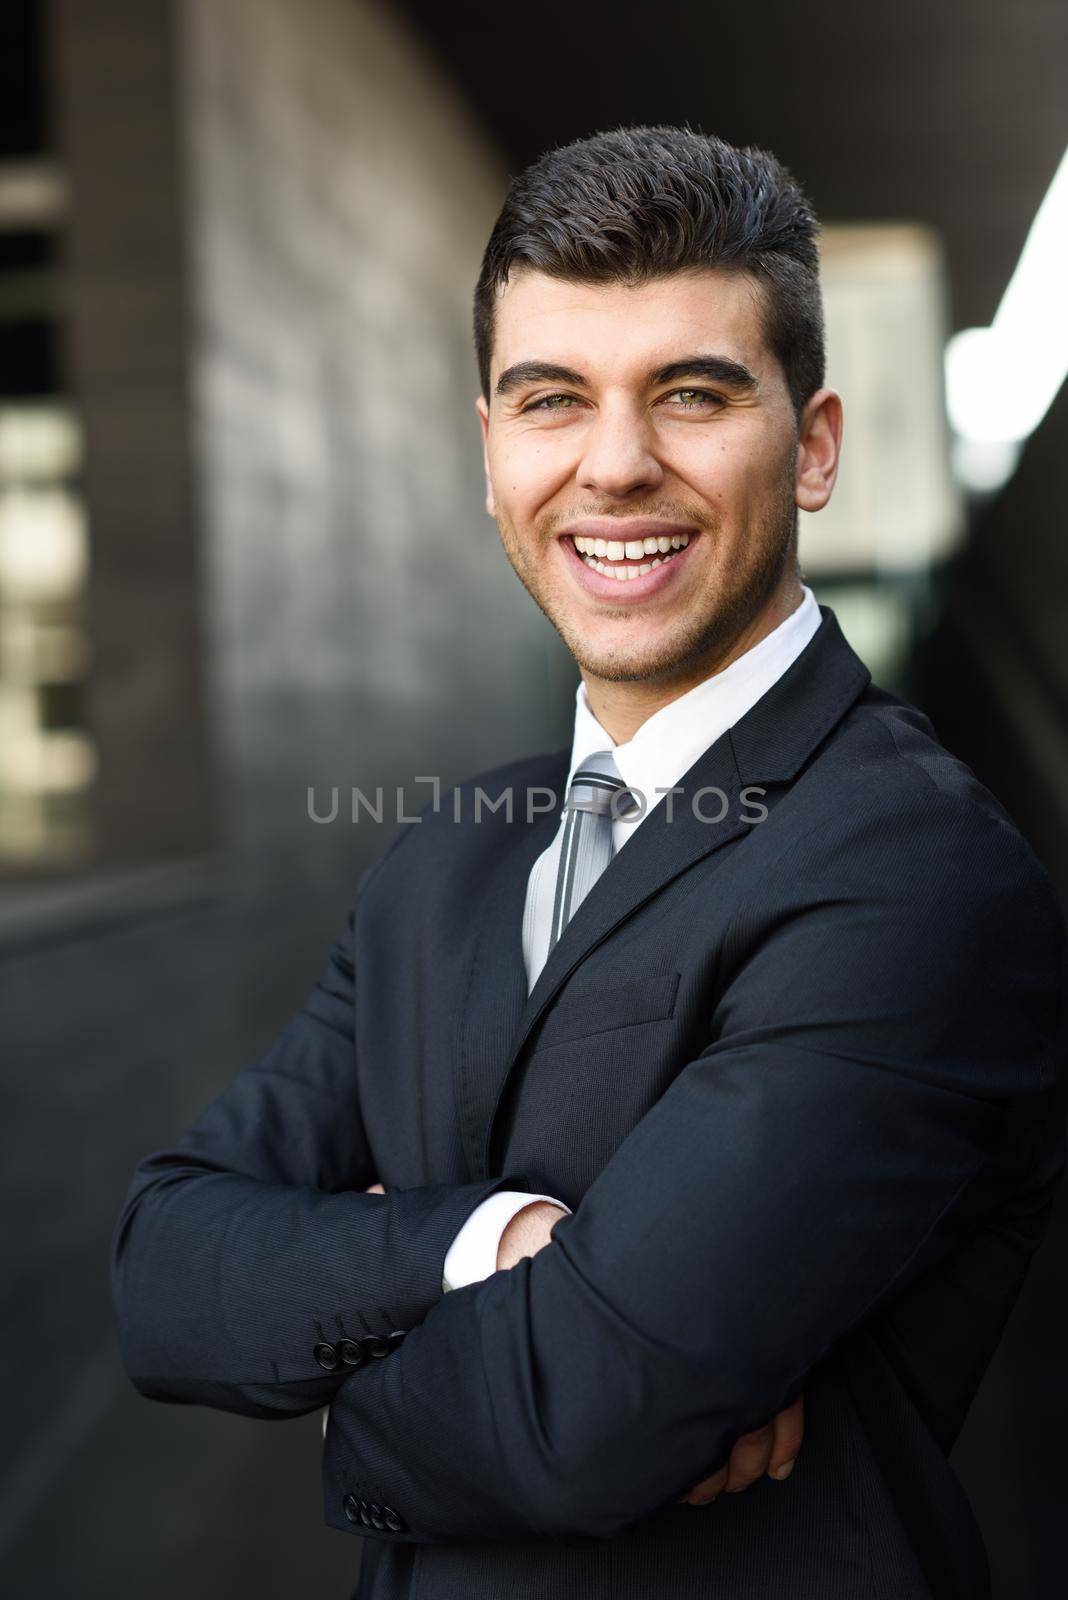 Young businessman near a office building wearing black suit by javiindy